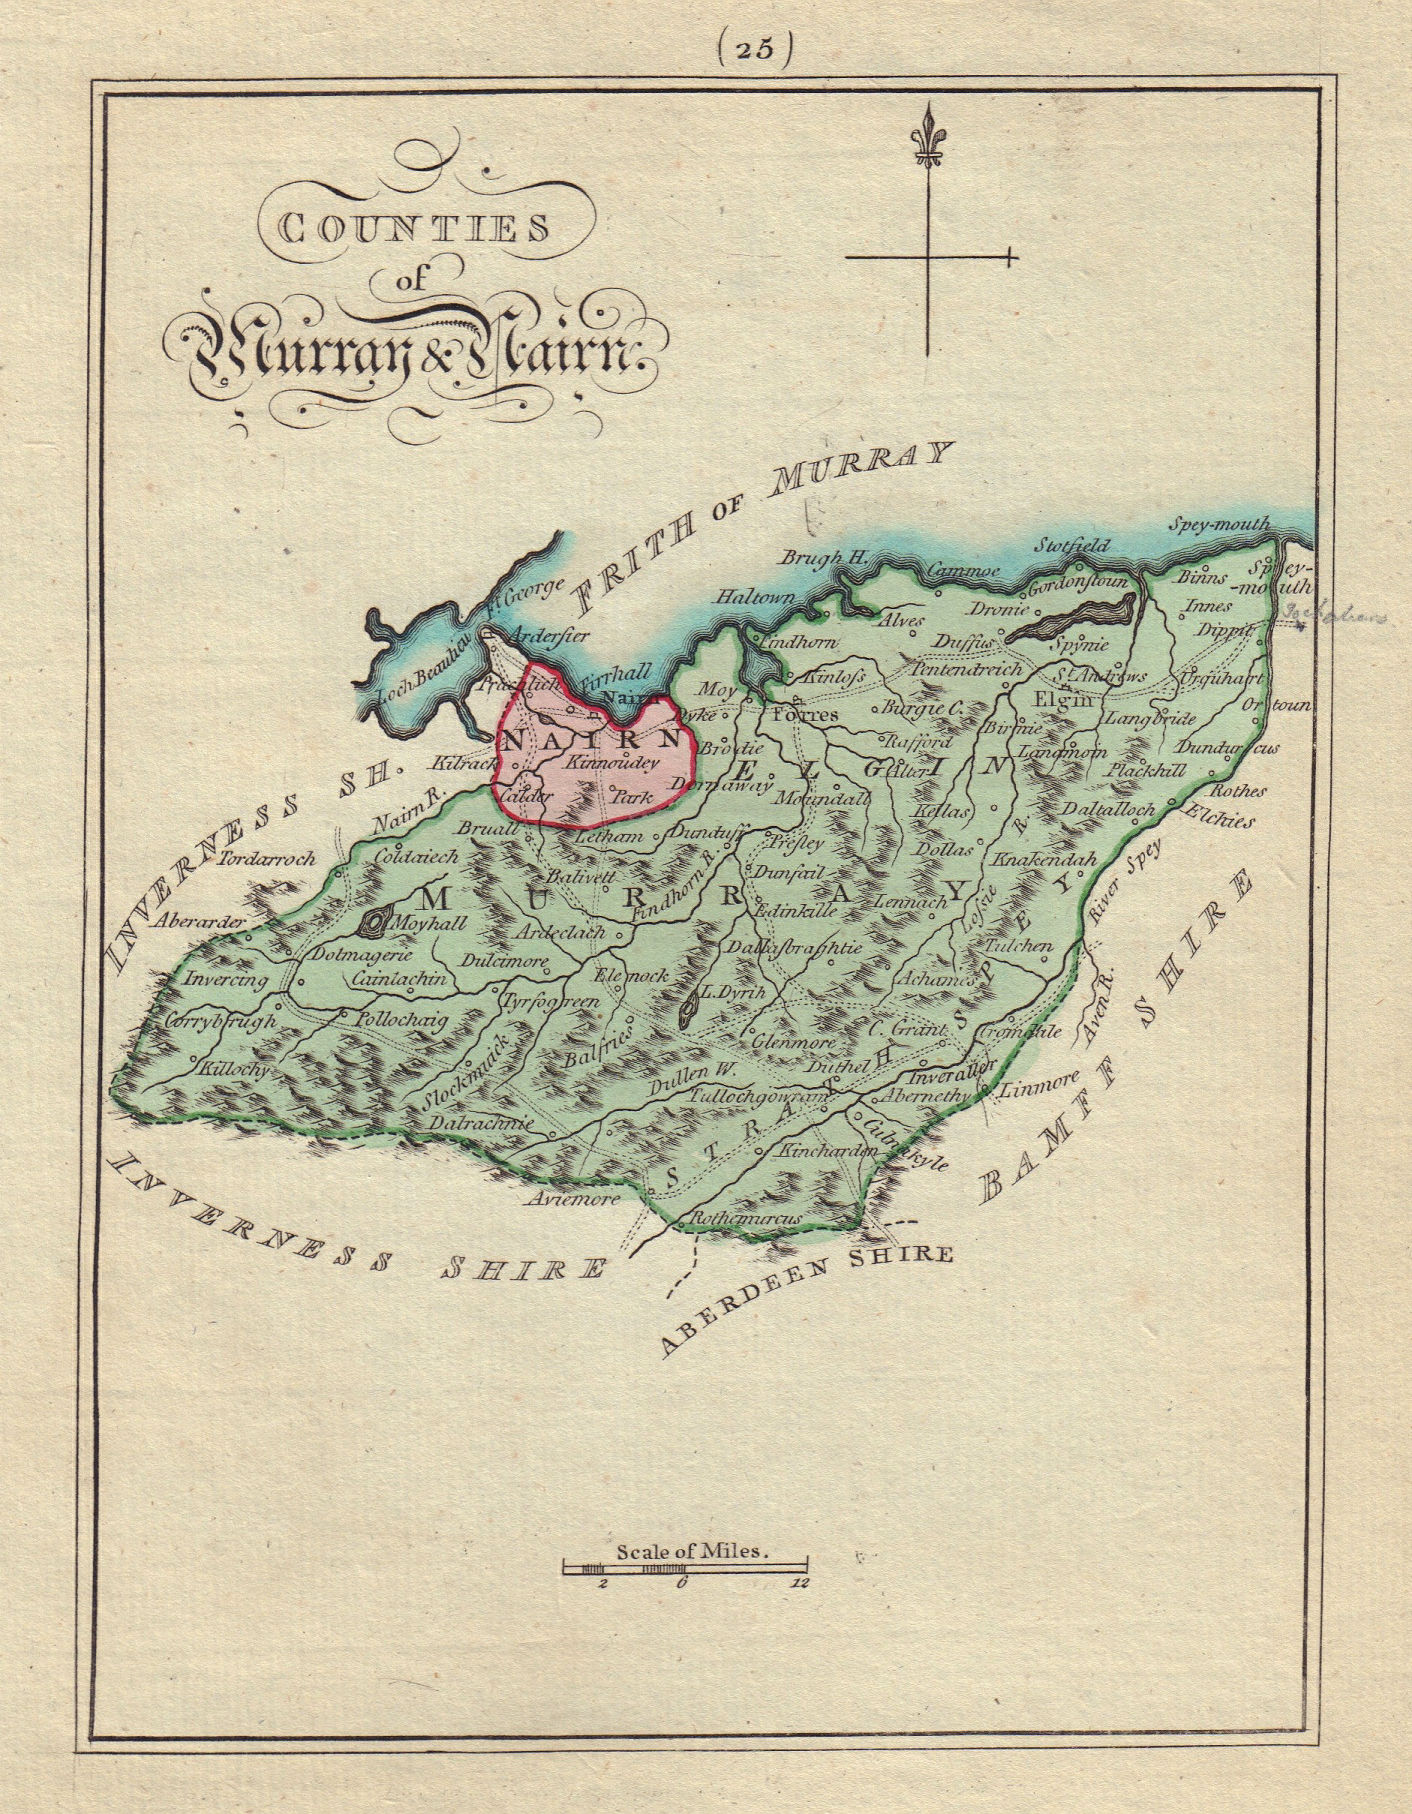 Associate Product Counties of Murray and Nairn. Moray and Nairnshire. SAYER / ARMSTRONG 1794 map